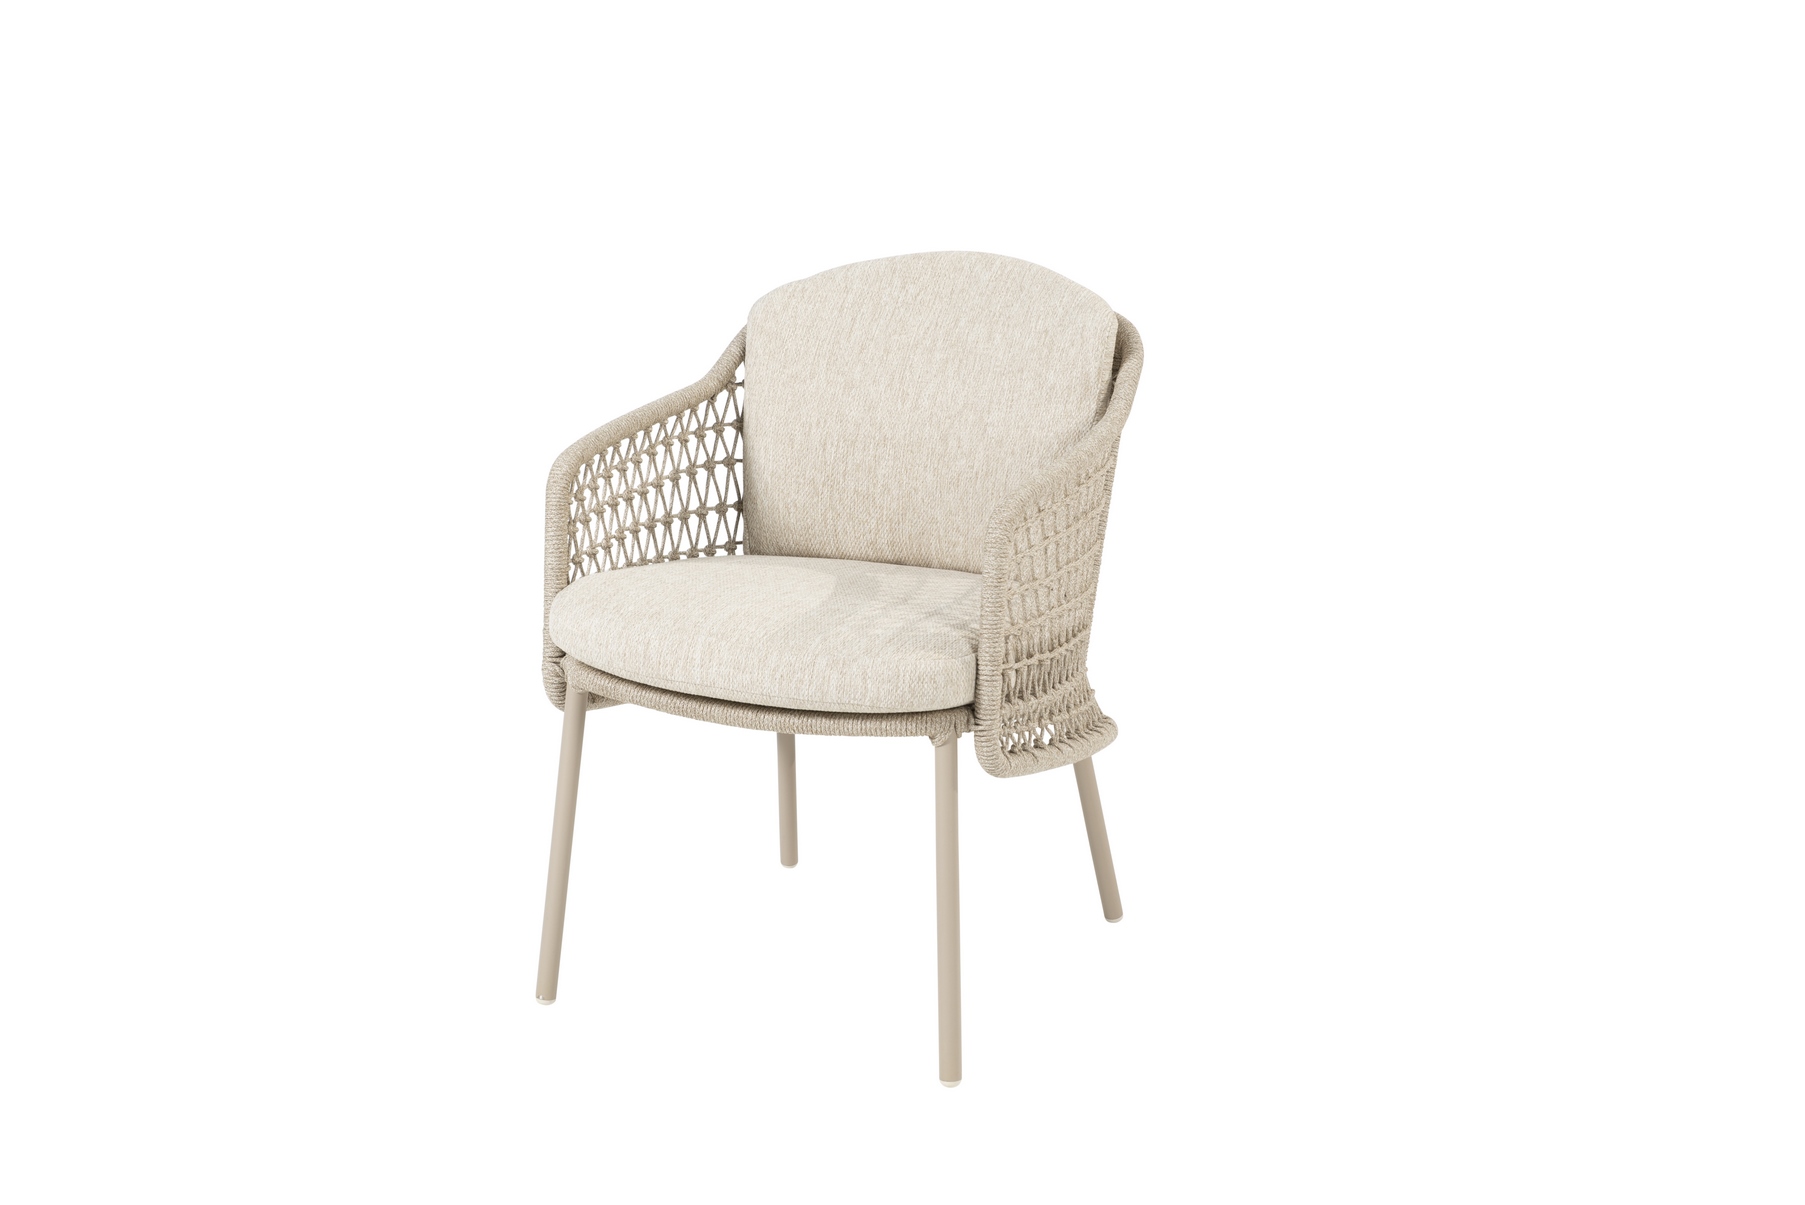 213935__Puccini_dining_chair_latte_with_2_cushions_01.jpg